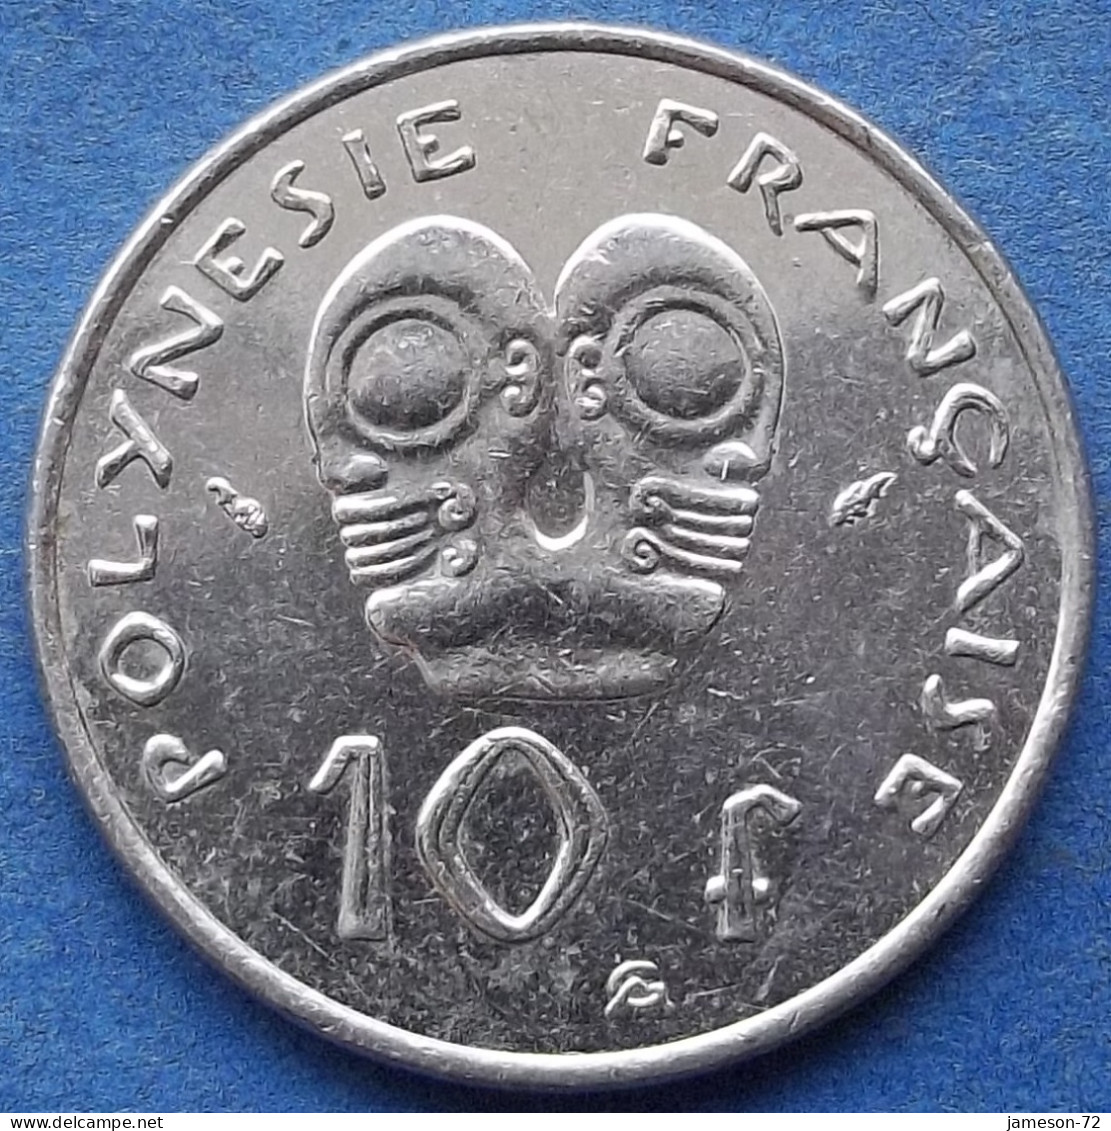 FRENCH POLYNESIA - 10 Francs 1991 KM# 8 French Overseas Territory - Edelweiss Coins - Französisch-Polynesien